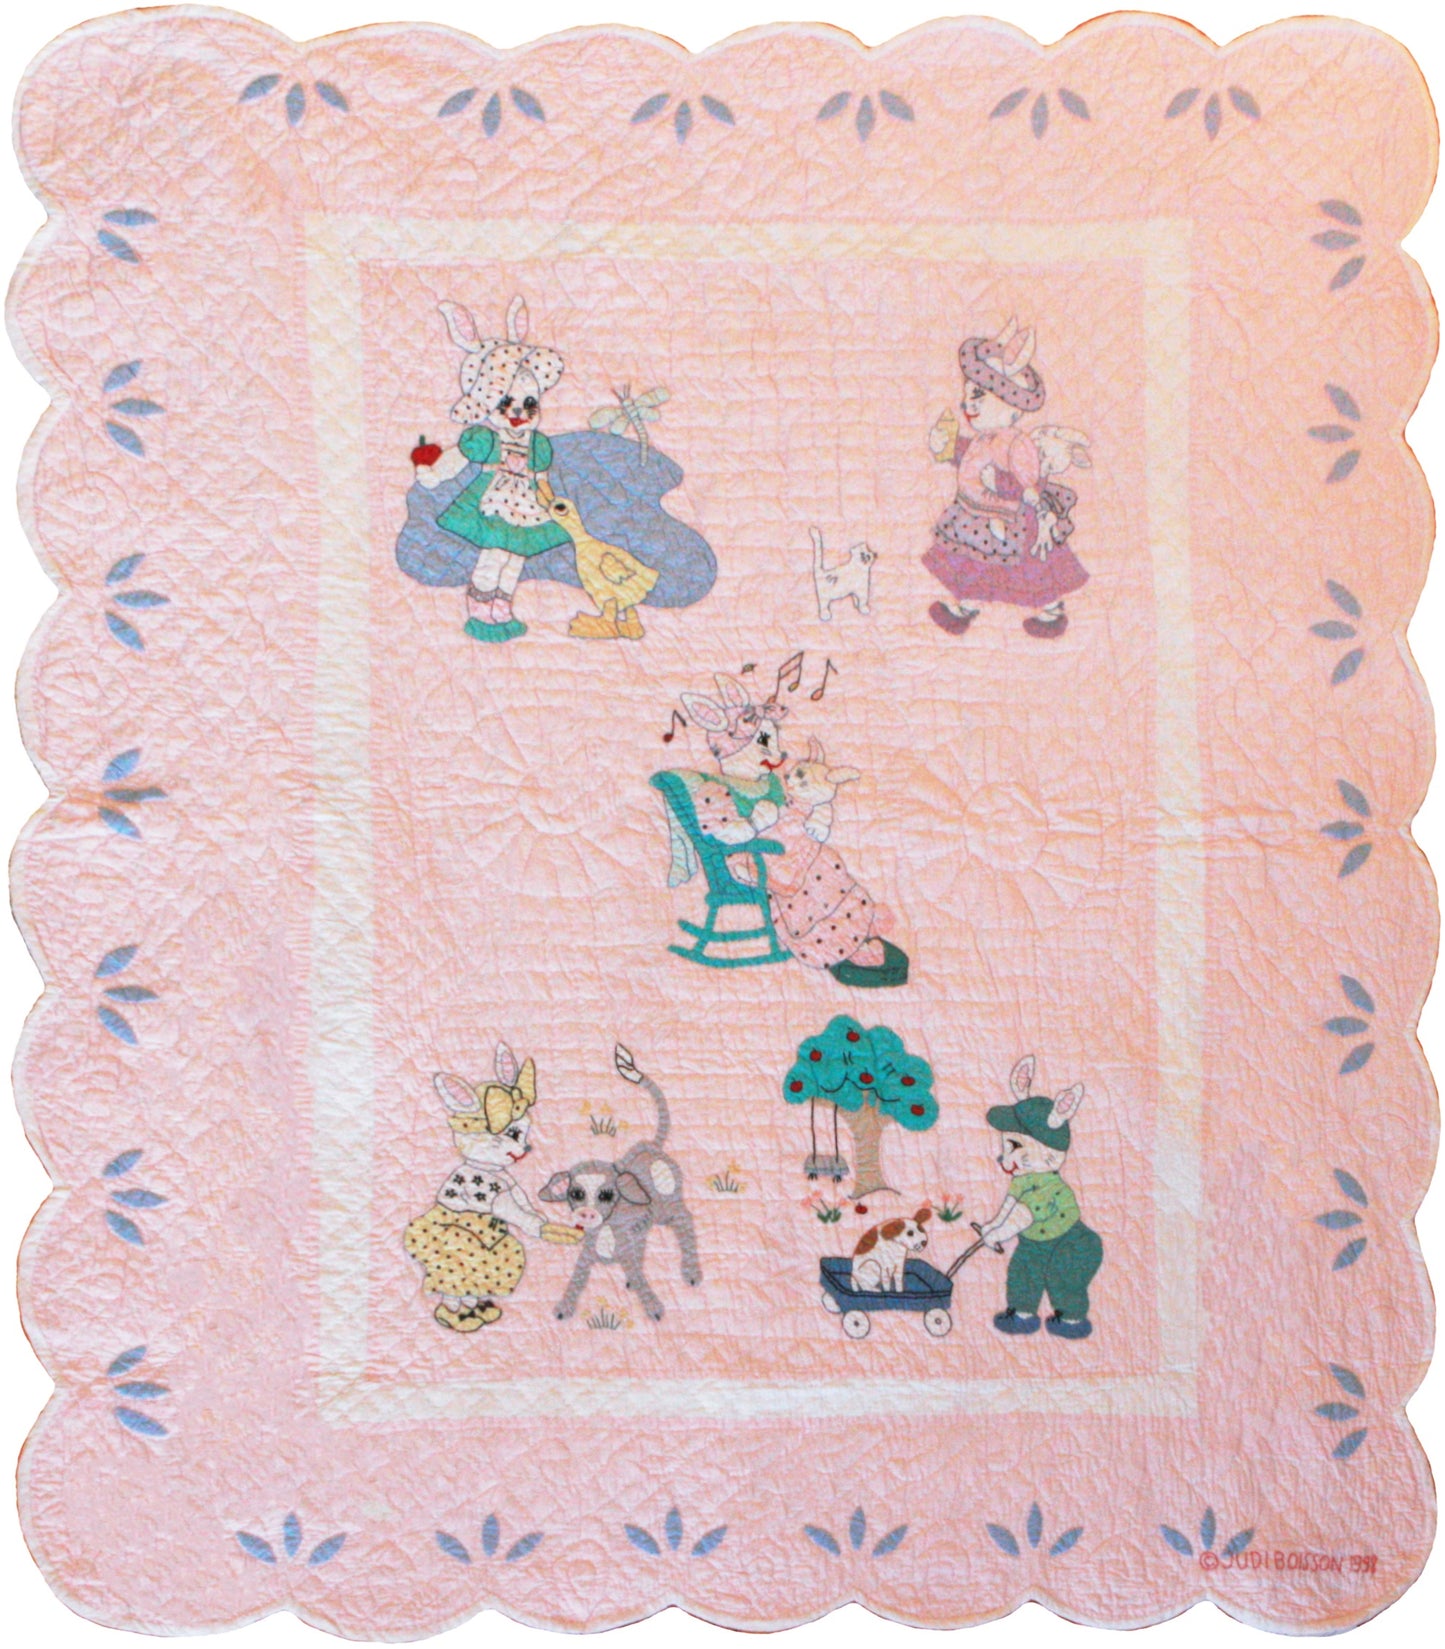 "Bunny Family" in Pink Crib Quilt 45" x 53"